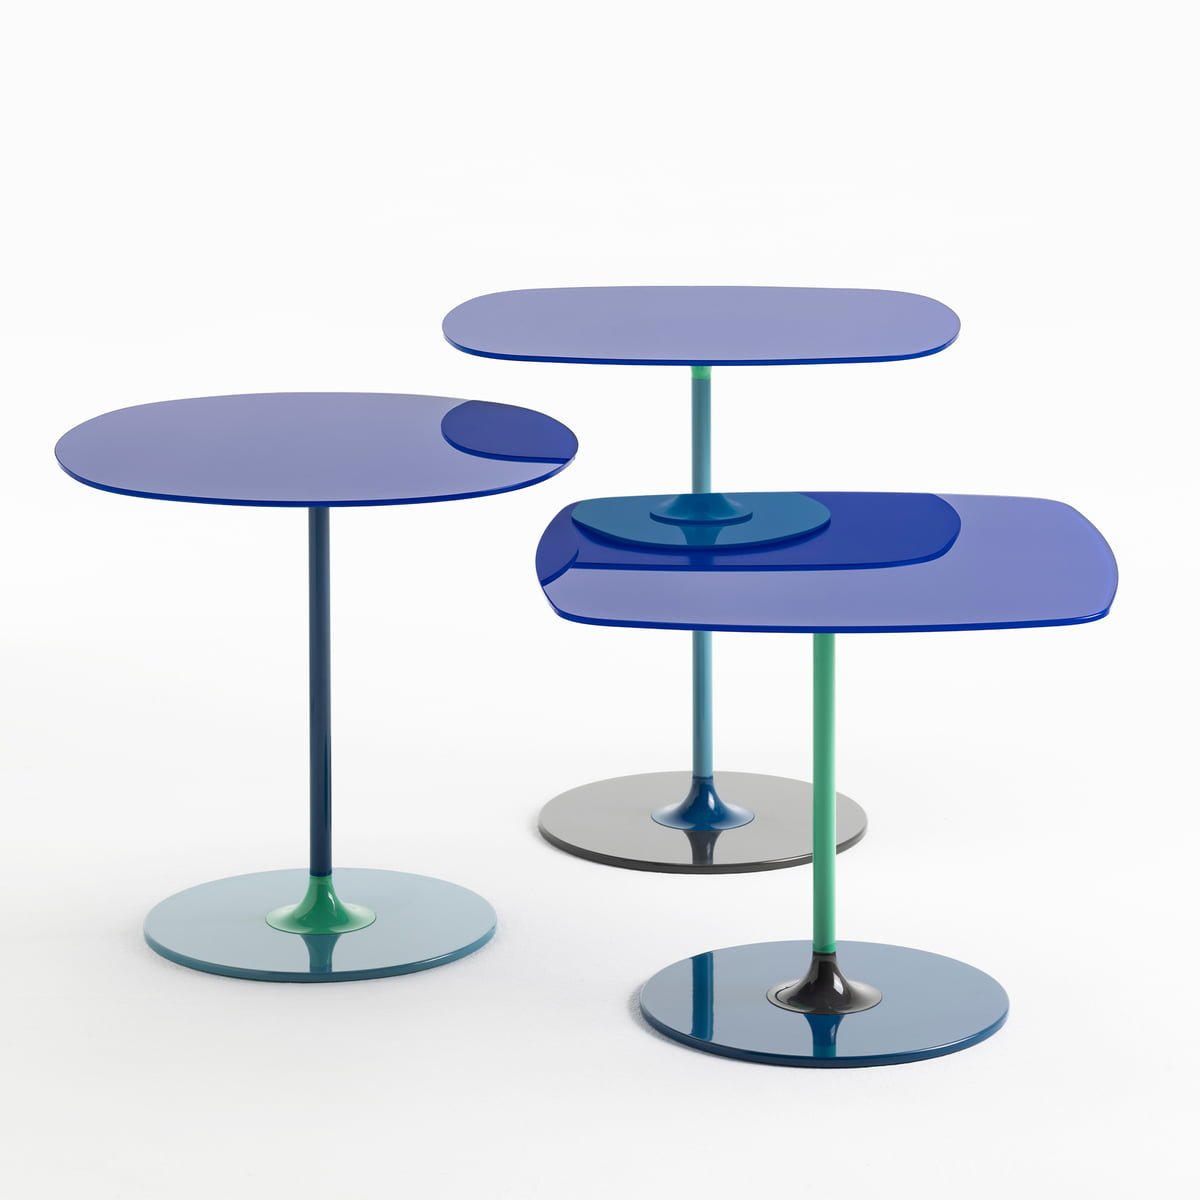 Thierry end table from Kartell, designed by Piero Lissoni